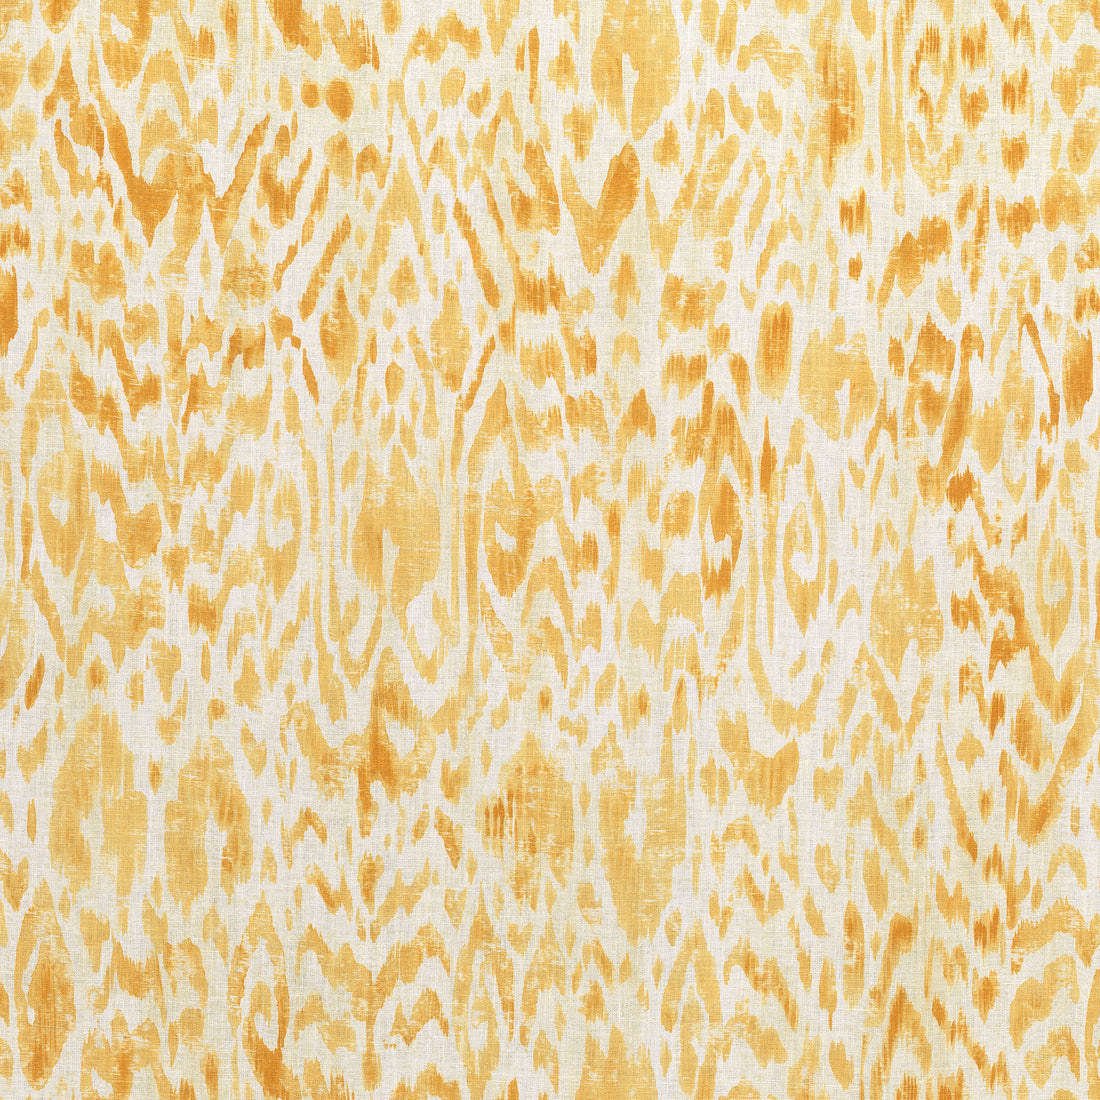 Carlotta fabric in yellow color - pattern number F975457 - by Thibaut in the Dynasty collection